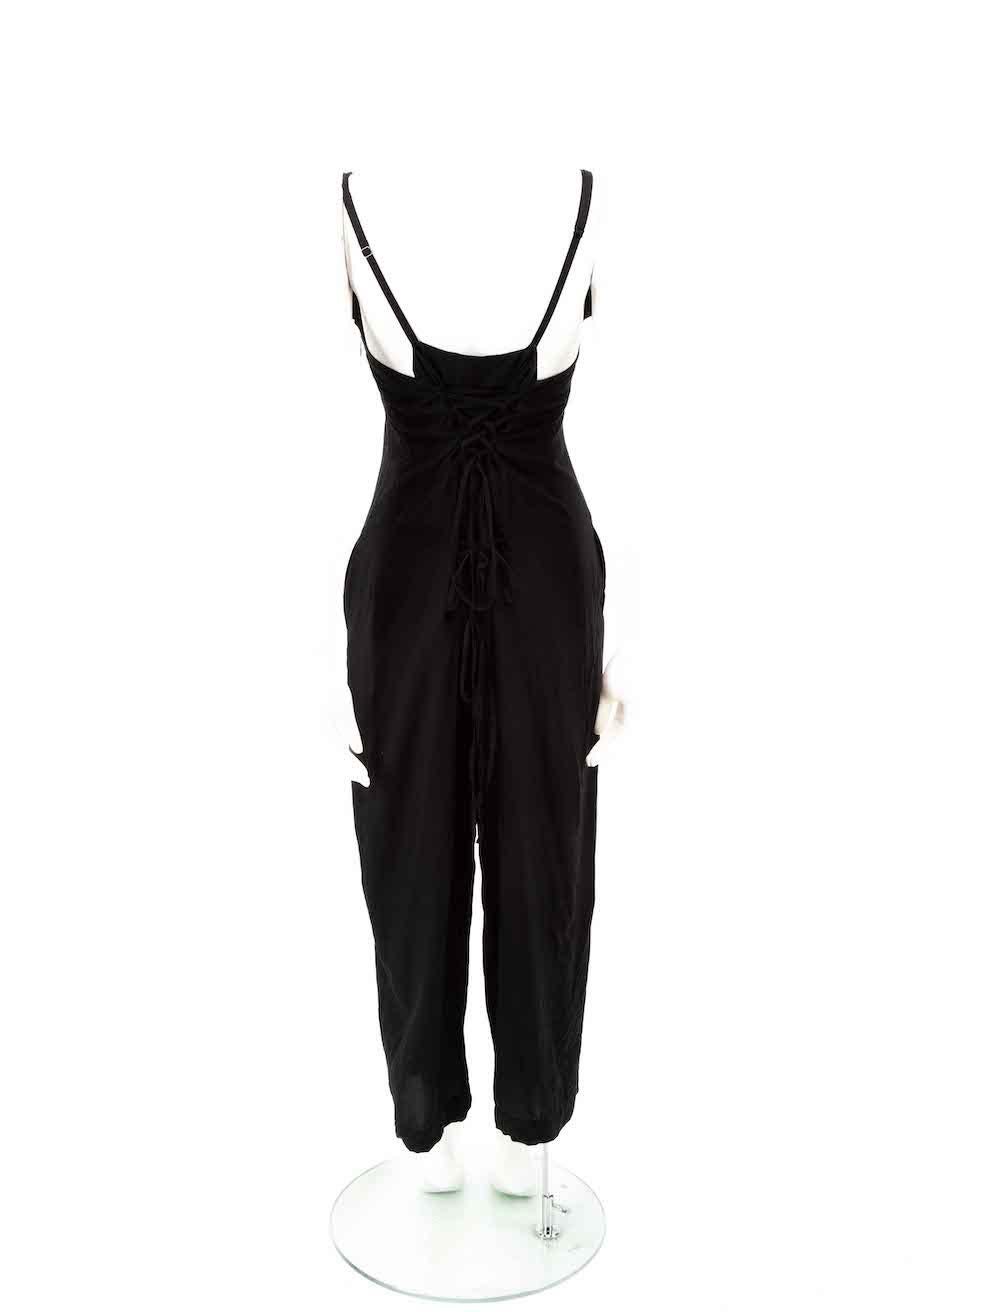 Yohji Yamamoto Michiko by Y's Black Lace Up Back Jumpsuit Size S In Excellent Condition For Sale In London, GB